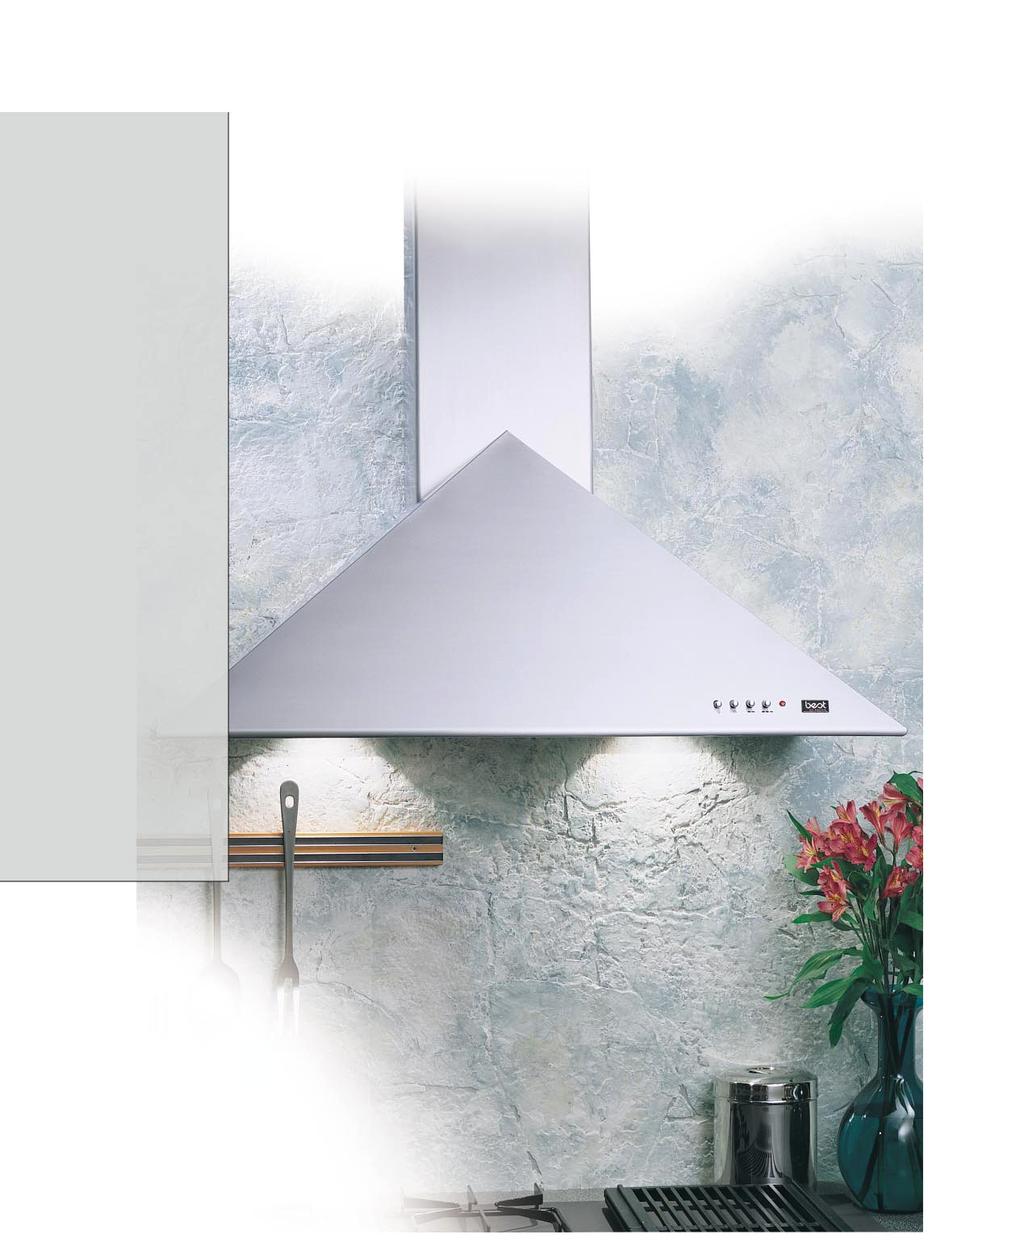 CHIMNEY HOODS K29 Seamless design and a bold shape in brushed stainless, or two durable powder coated finishes Quiet, efficient internal blower with HVI certified